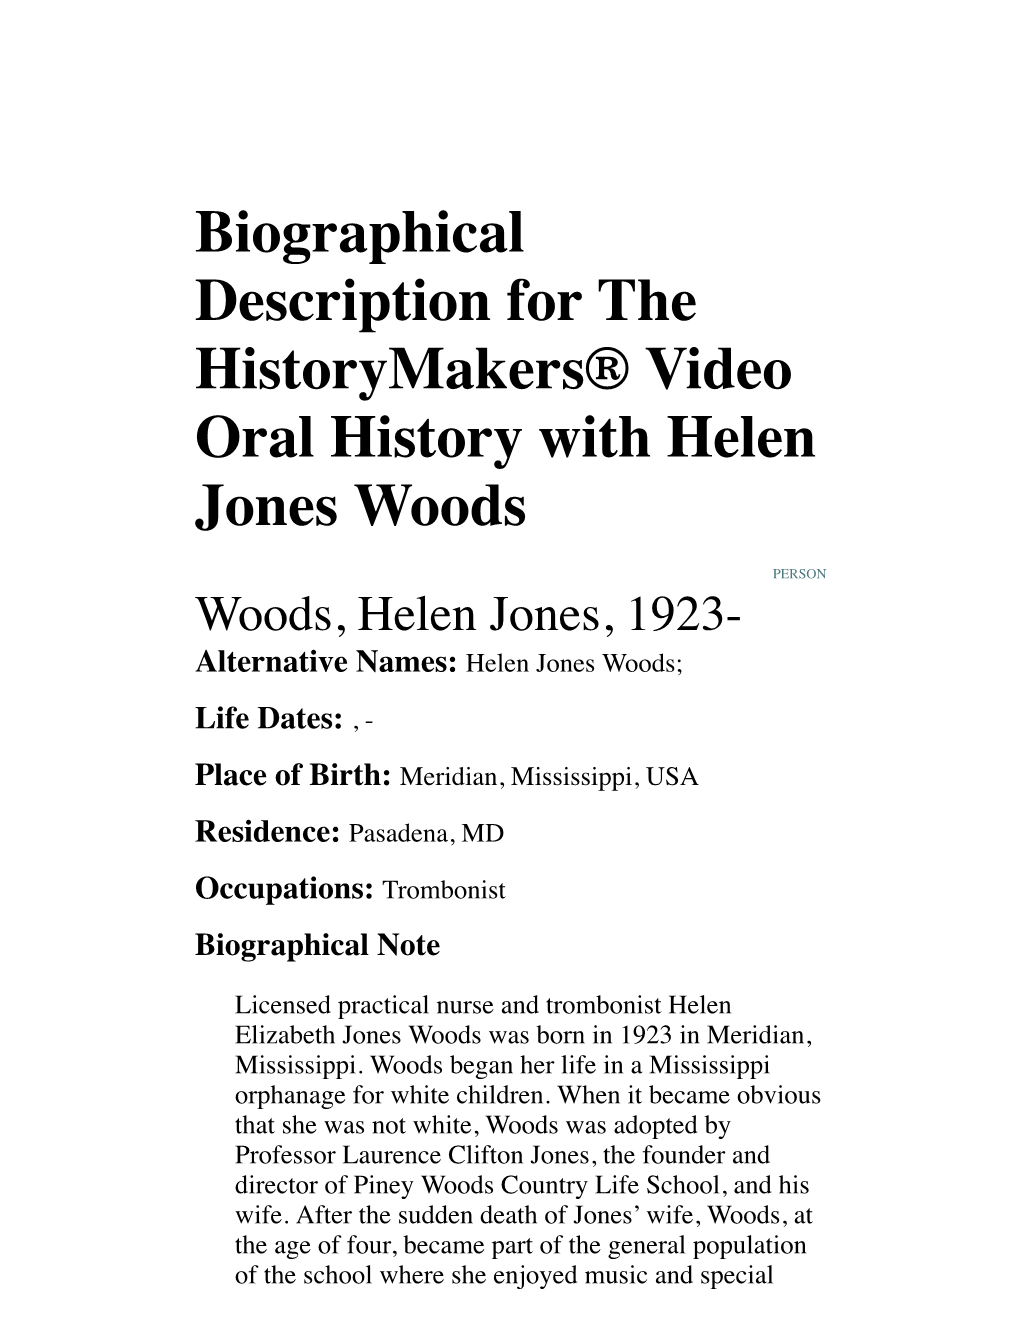 Biographical Description for the Historymakers® Video Oral History with Helen Jones Woods